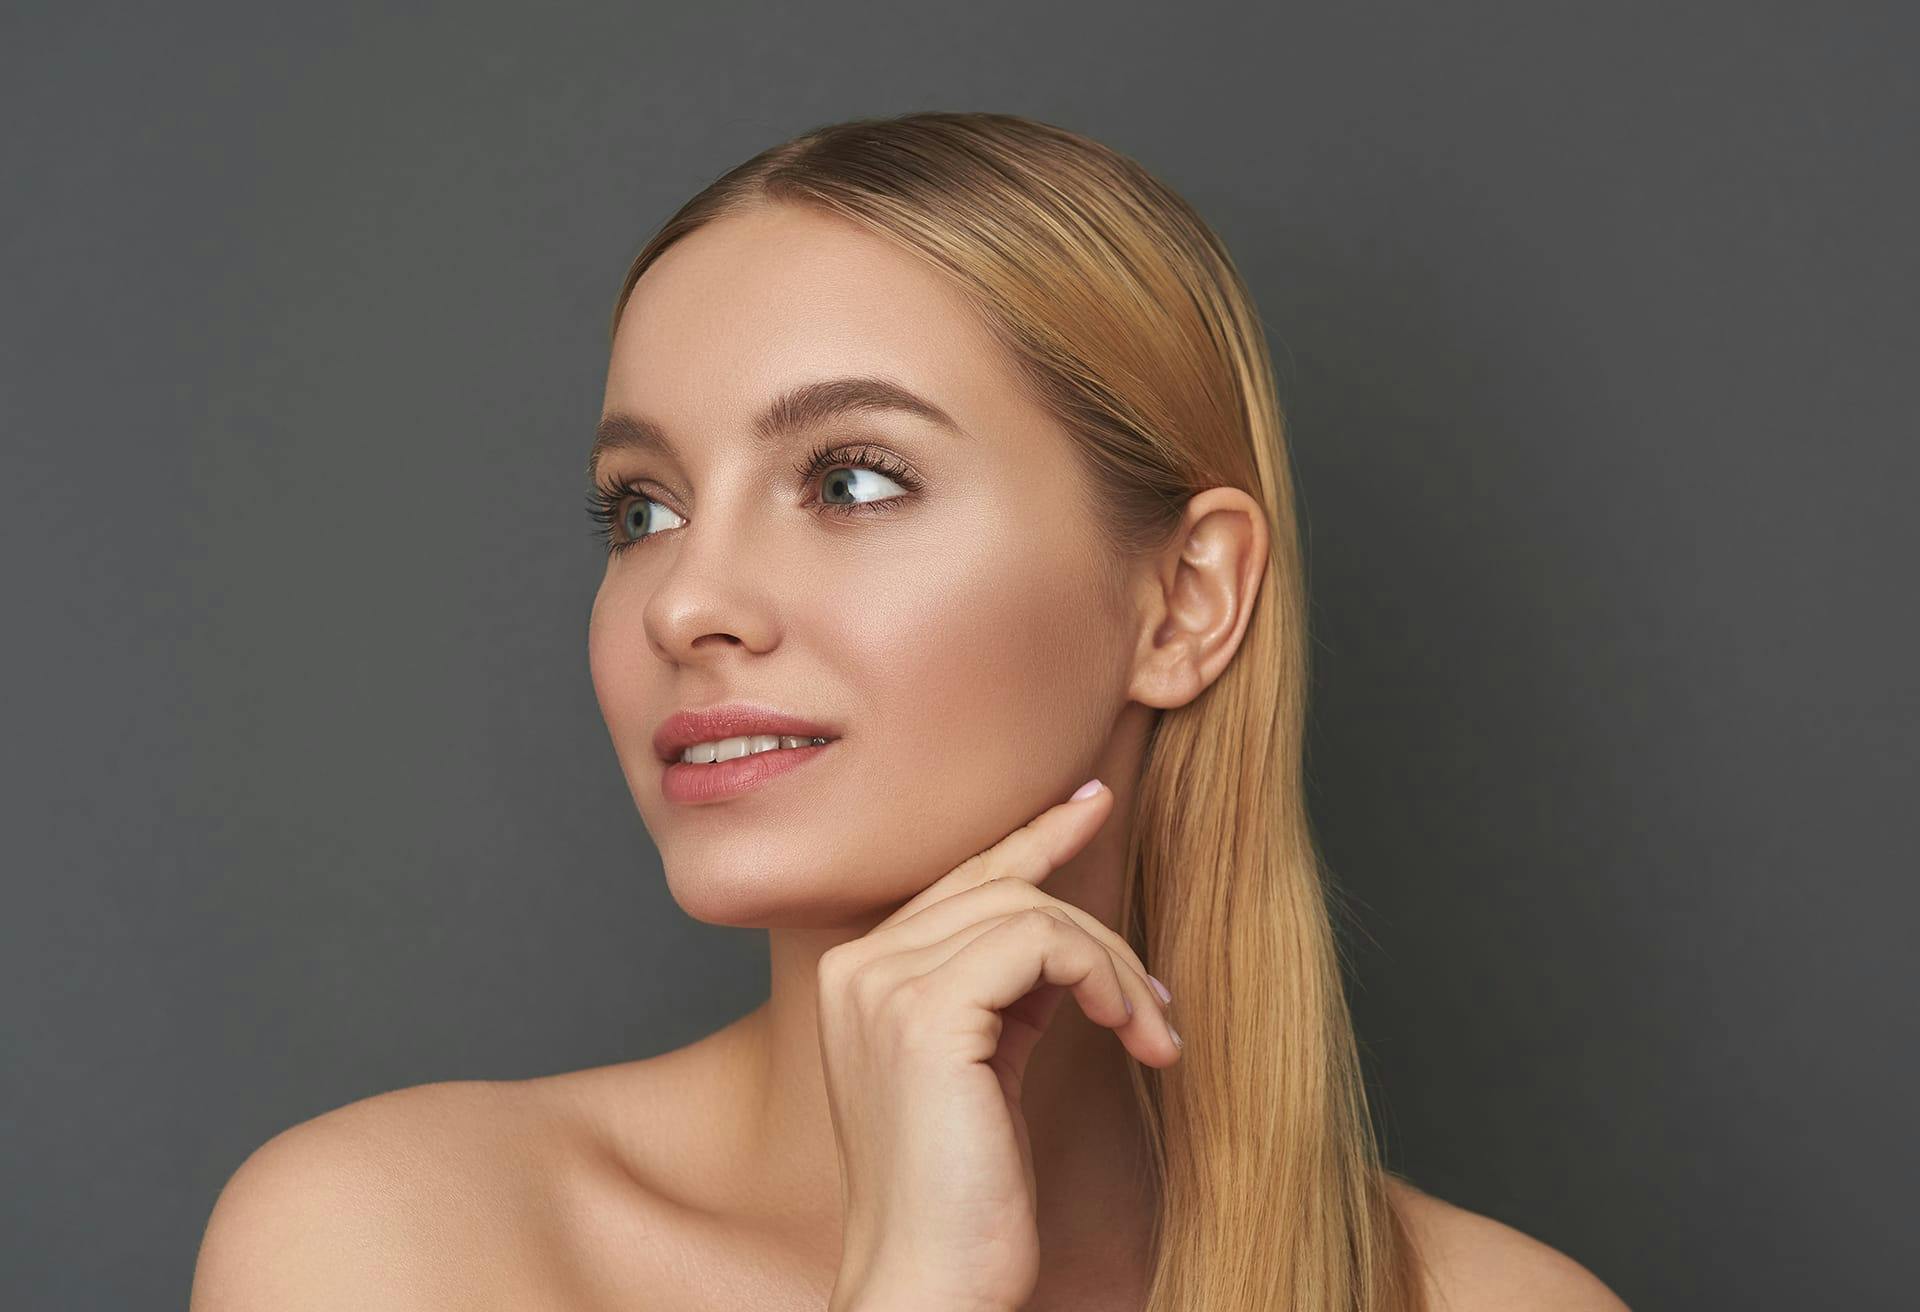 Woman with Clear Skin and Sleek Blonde Hair